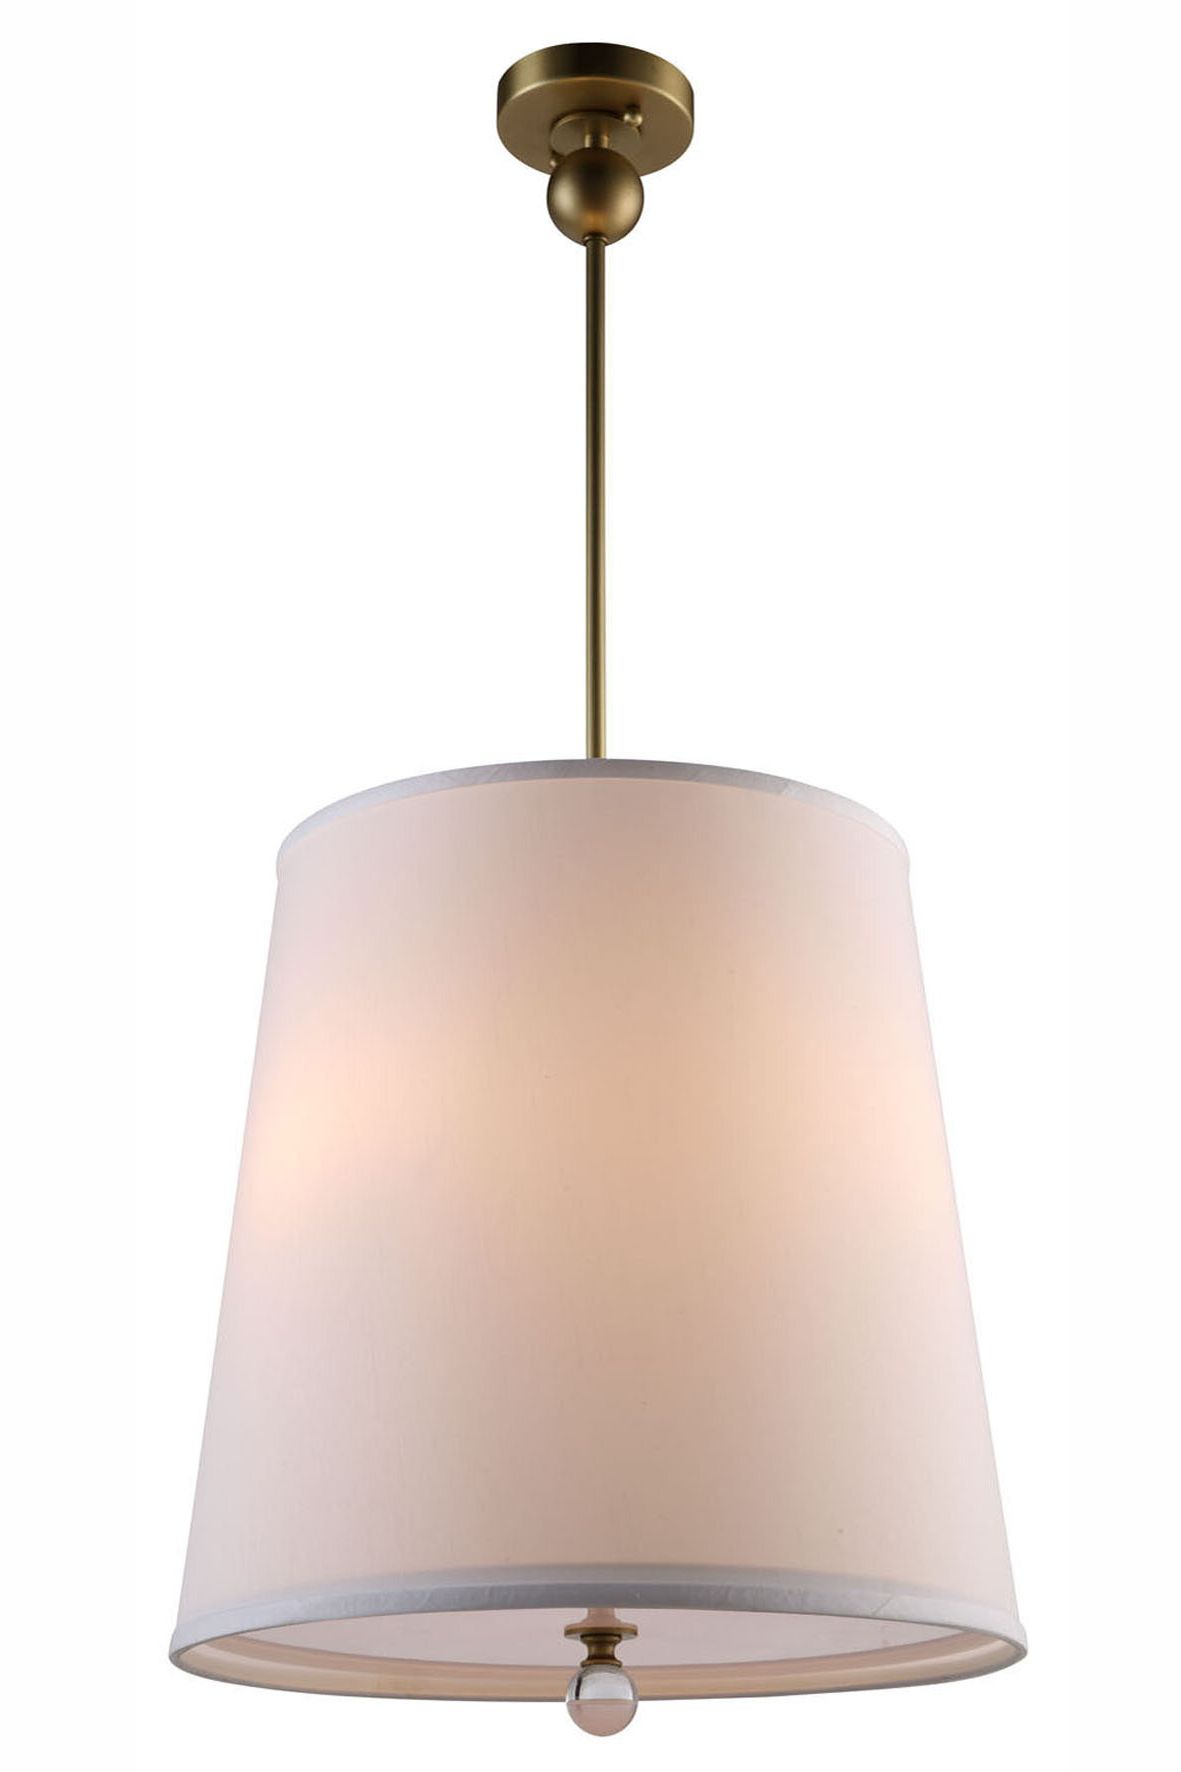 Vicenta 3 Light Cone Pendant Regarding Most Up To Date Friedland 3 Light Drum Tiered Pendants (View 15 of 25)